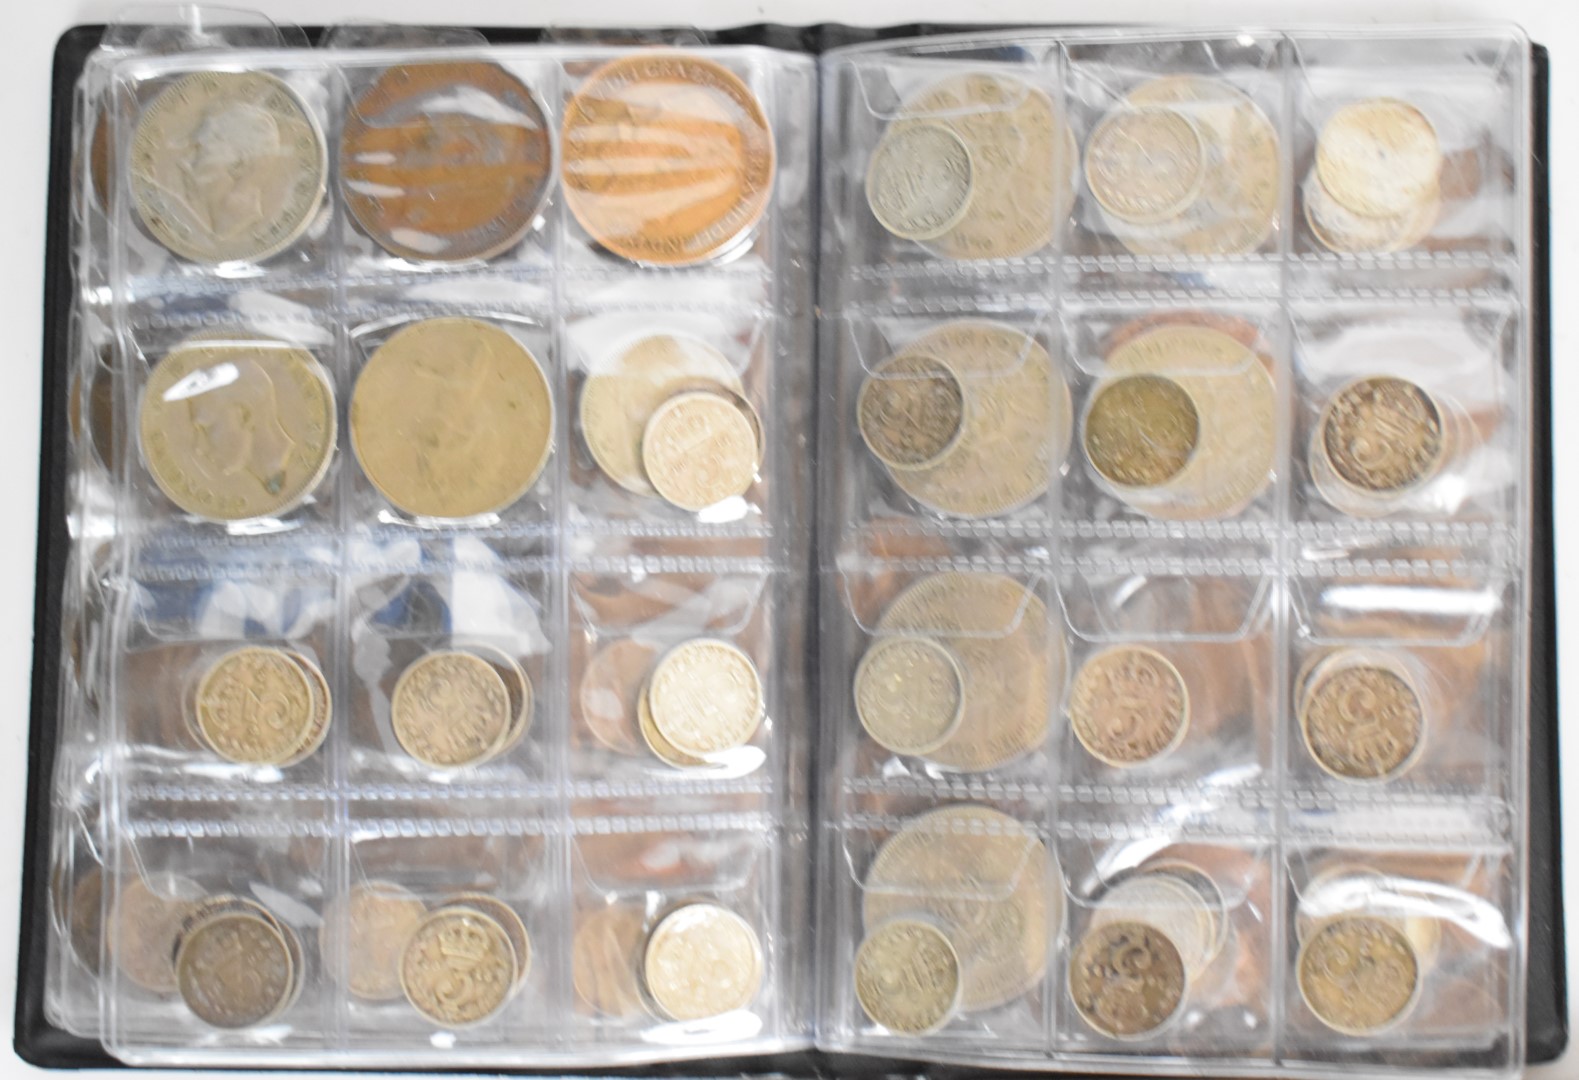 Mixed copper and silver / cupronickel UK coinage in collector's folders, including some pre-1947 - Image 8 of 9